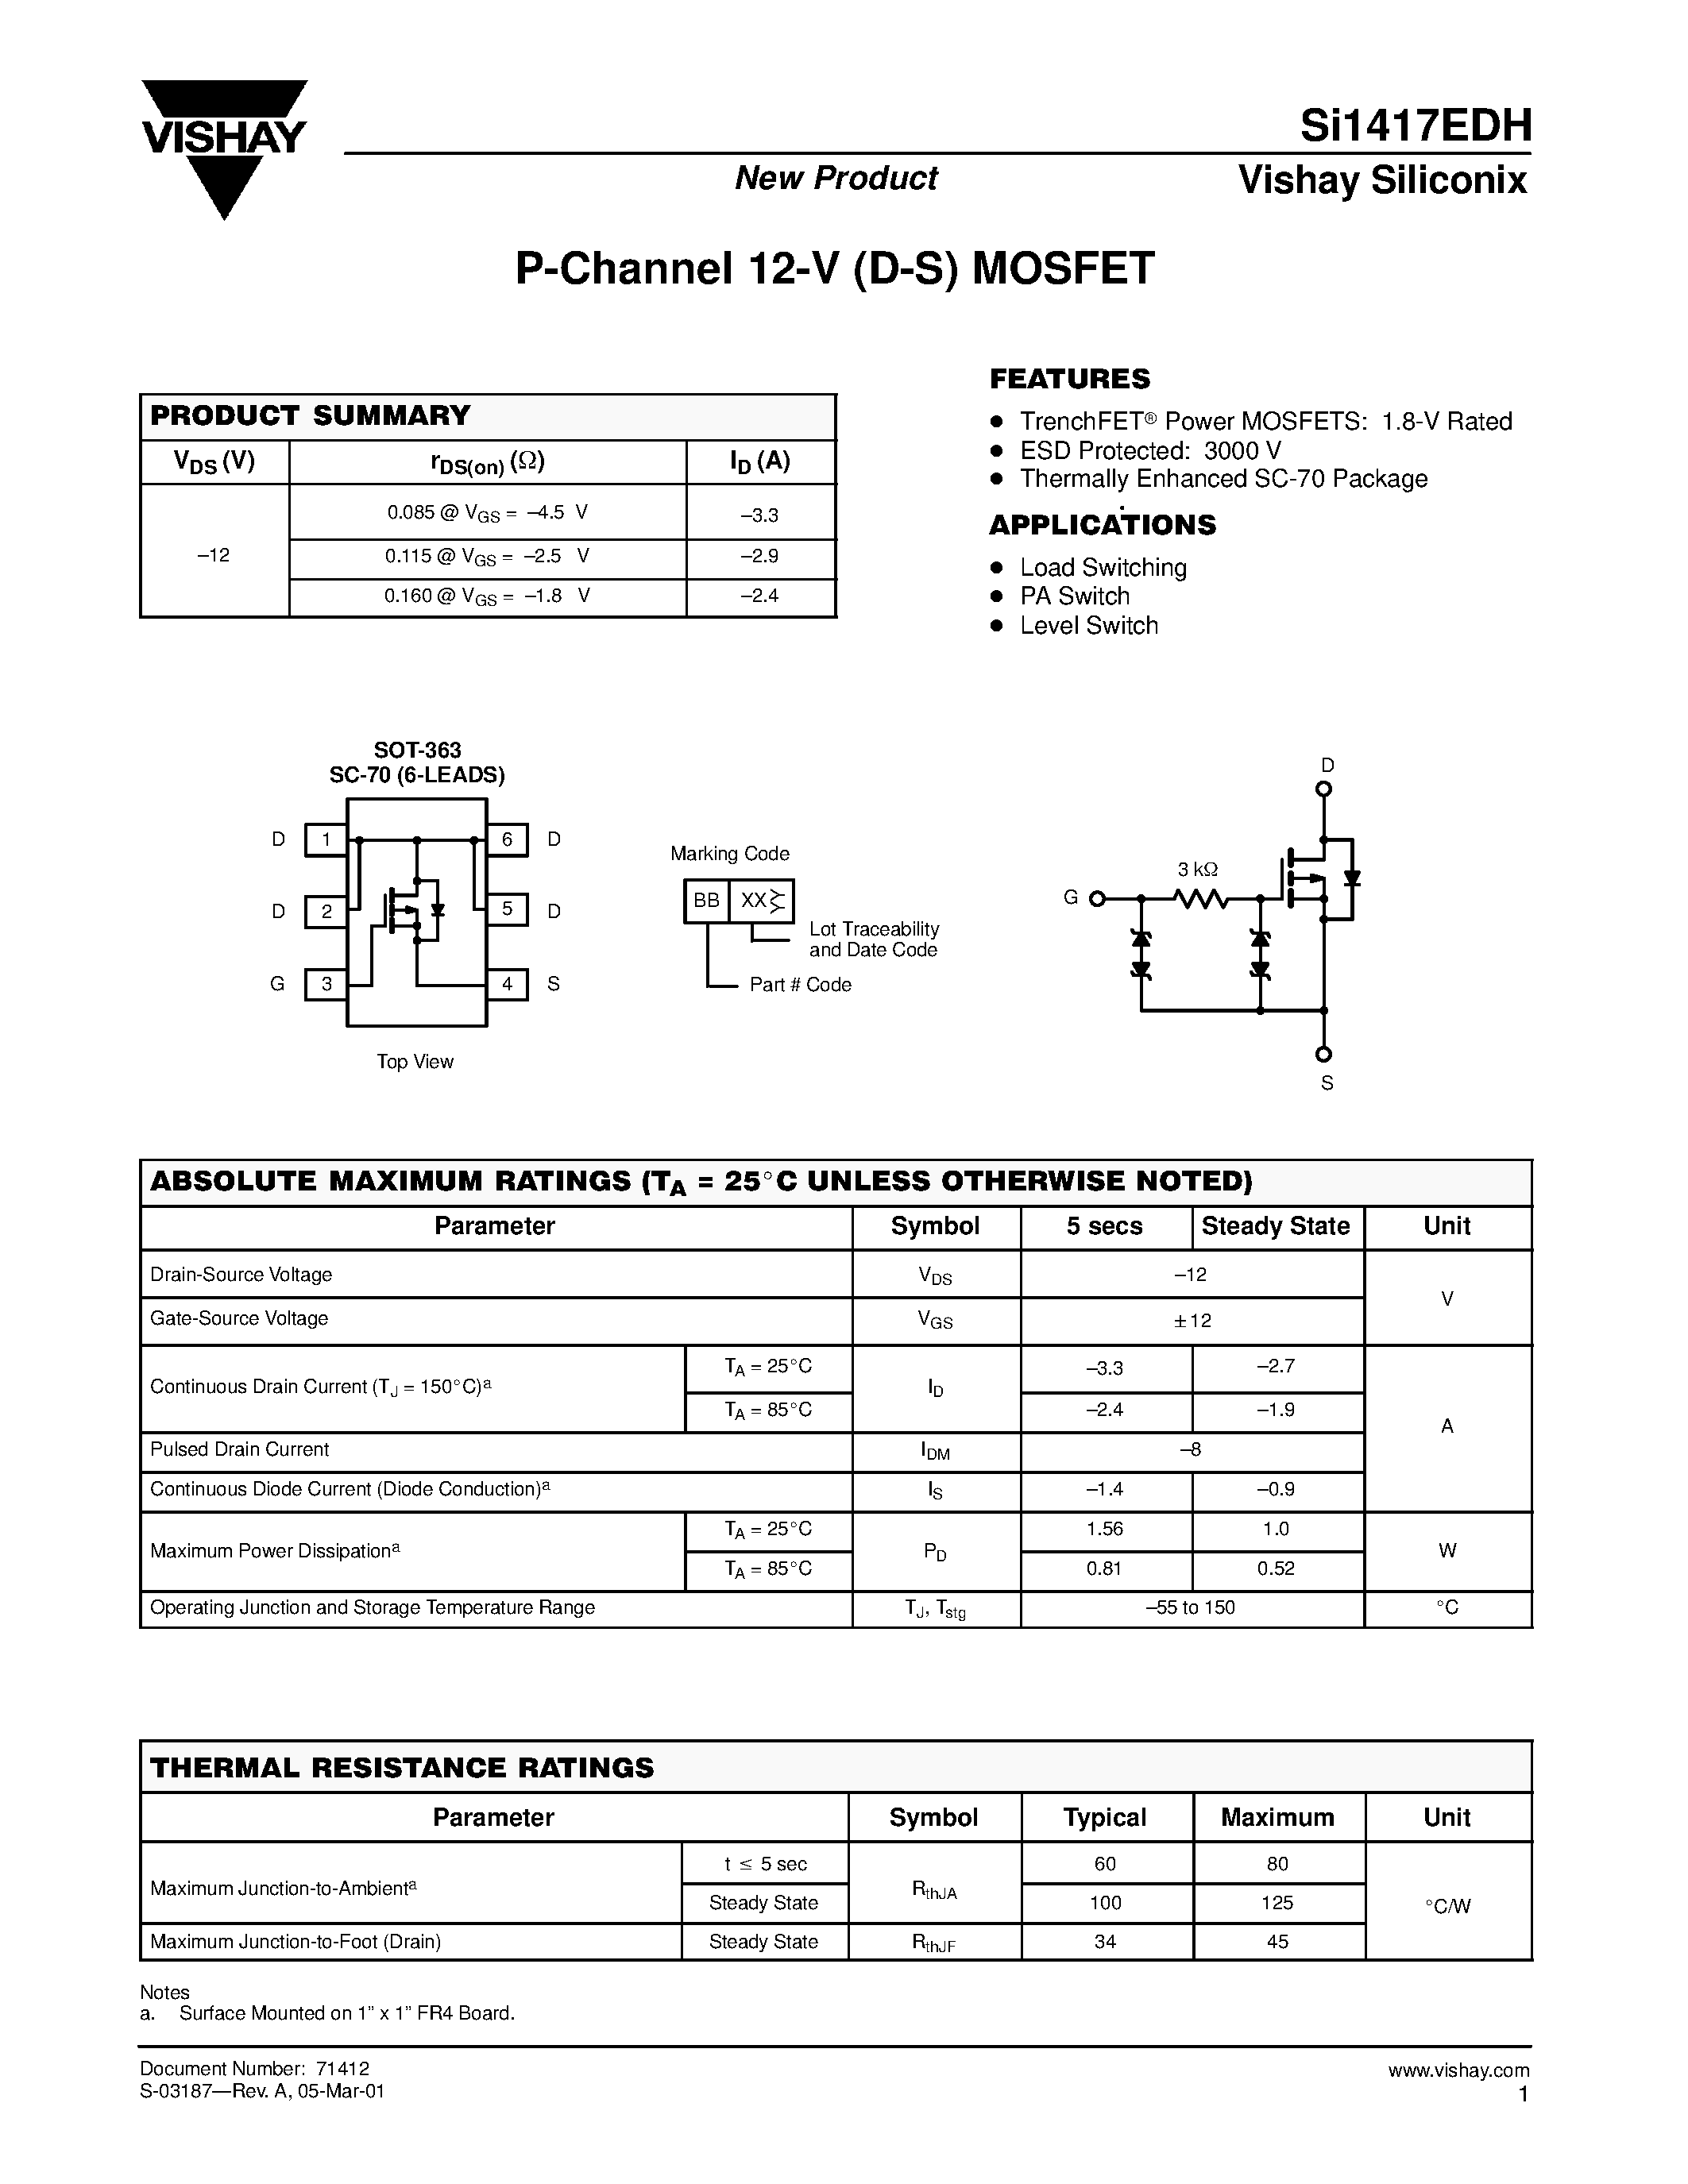 Datasheet SI1417EDH - P-Channel 12-V (D-S) MOSFET page 1